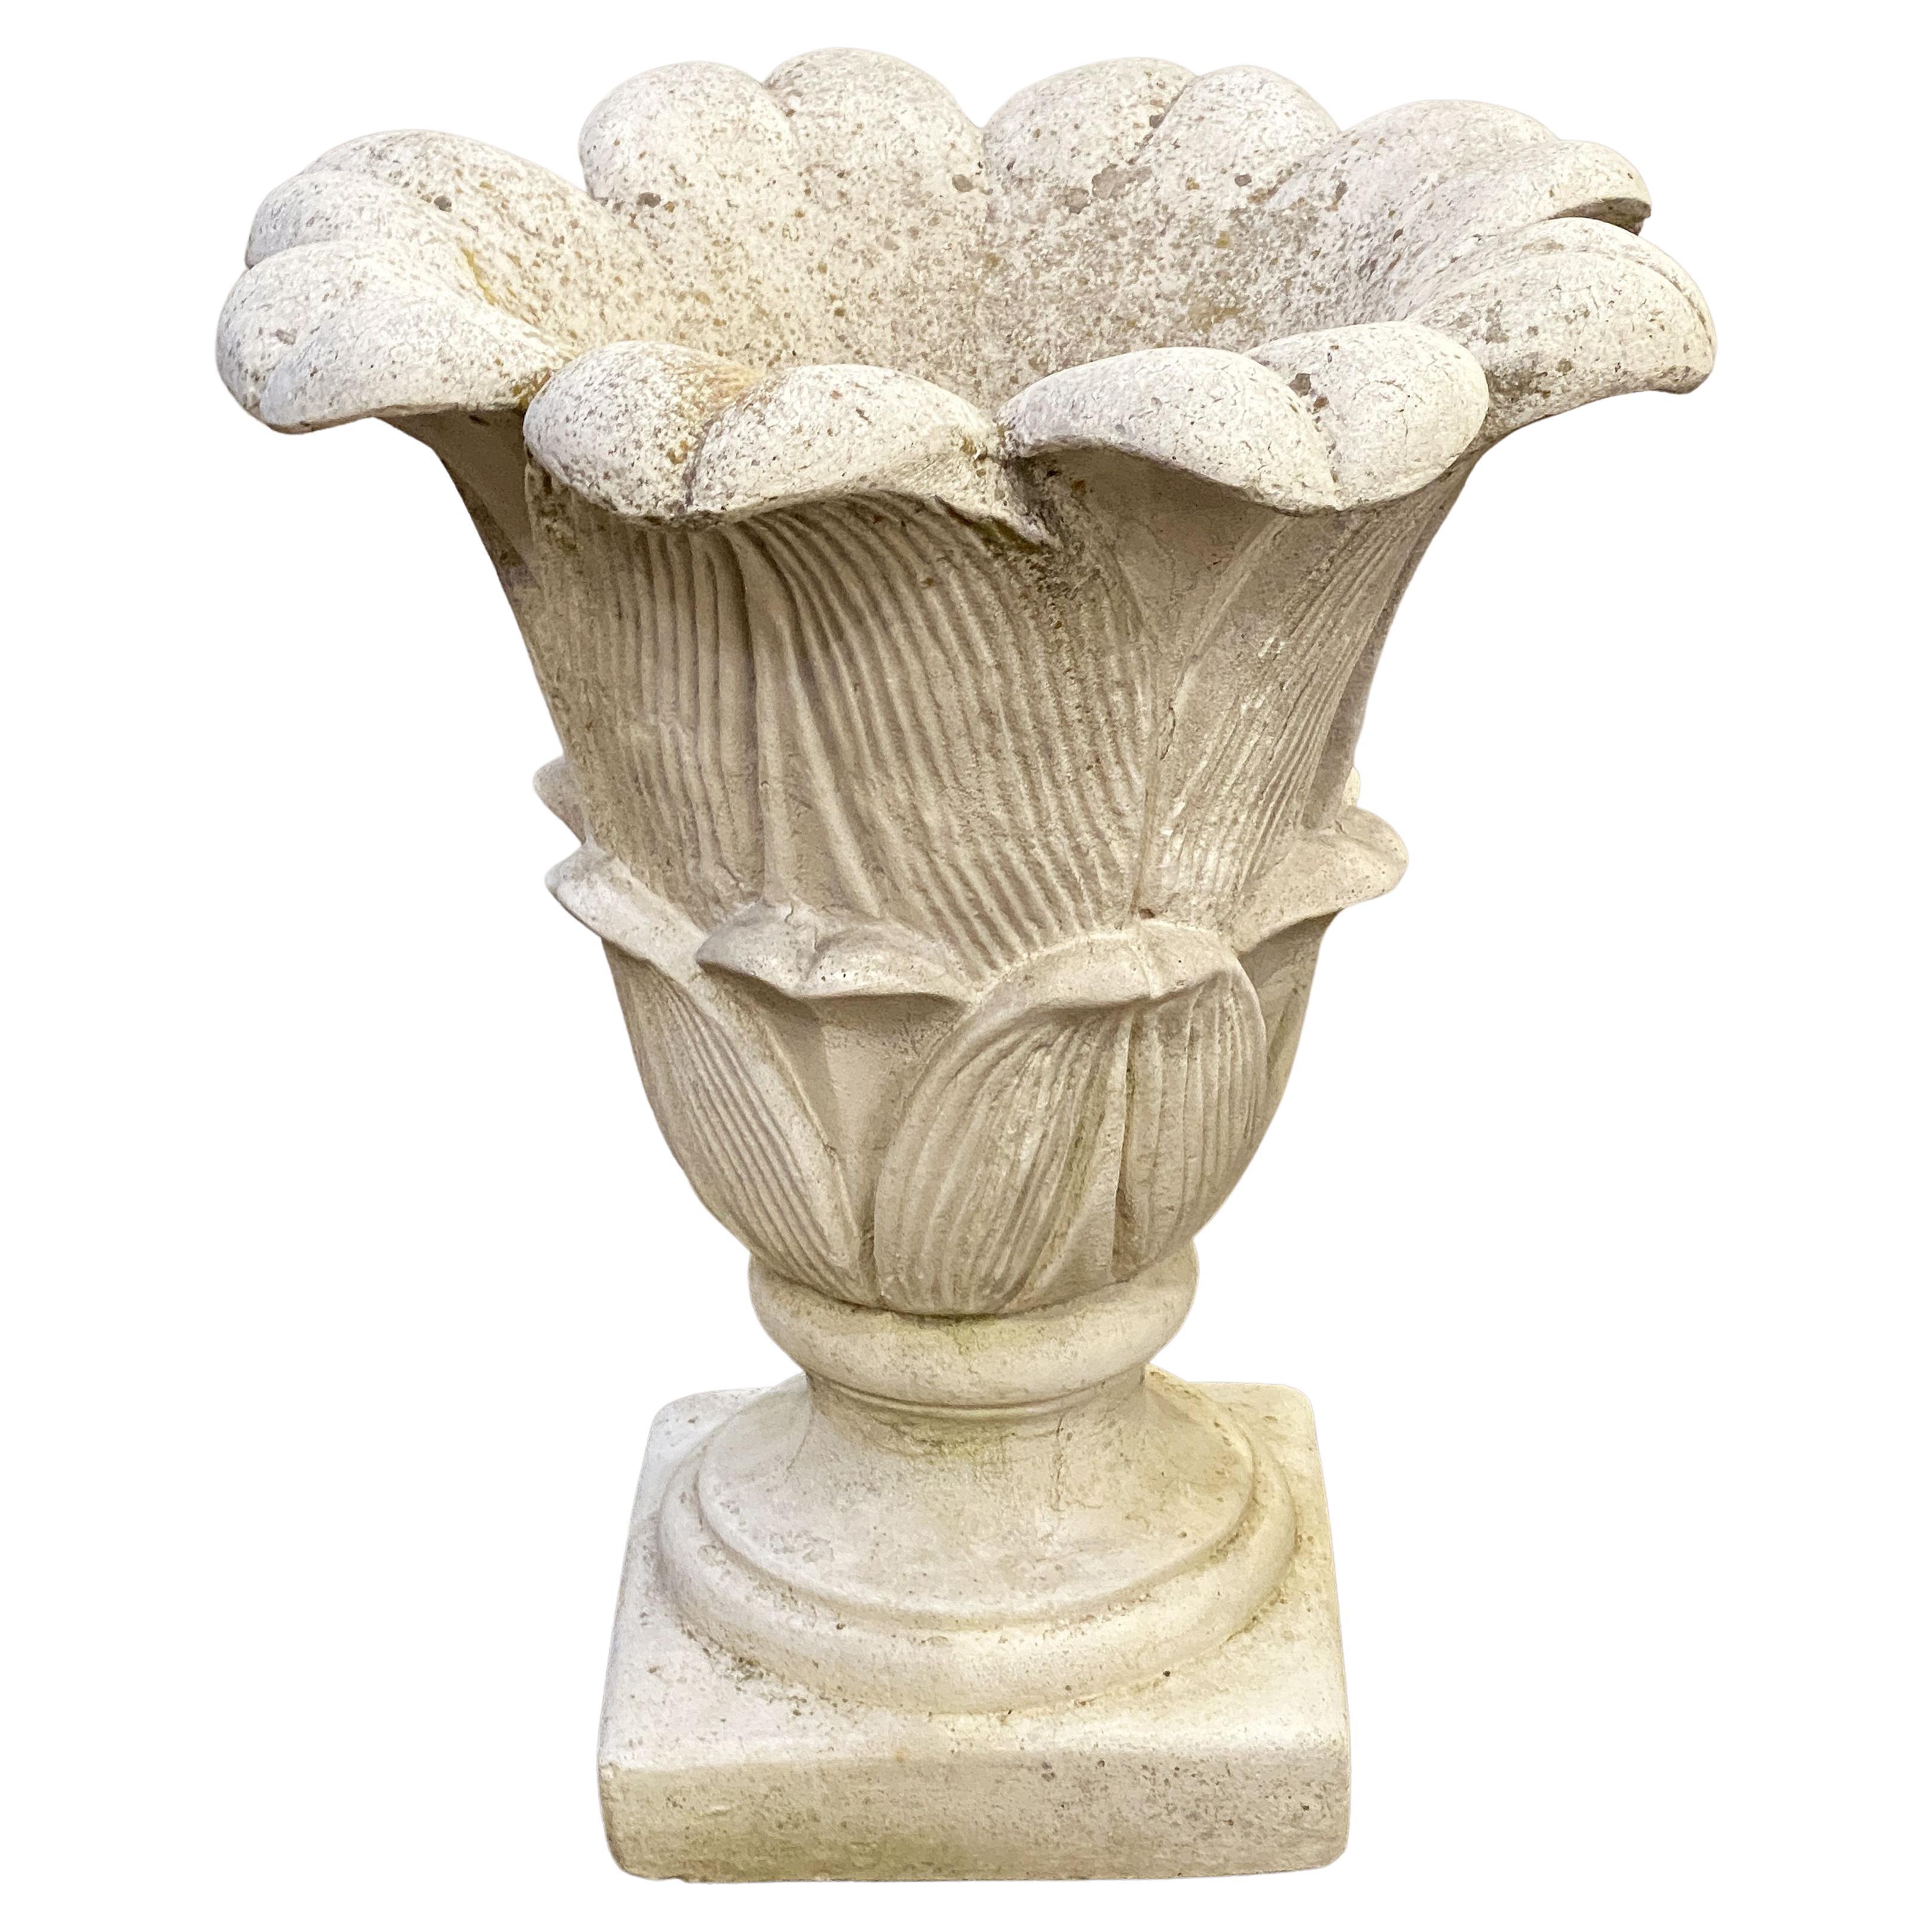 Lotus Garden Stone Planter Pot or Urn from Italy For Sale